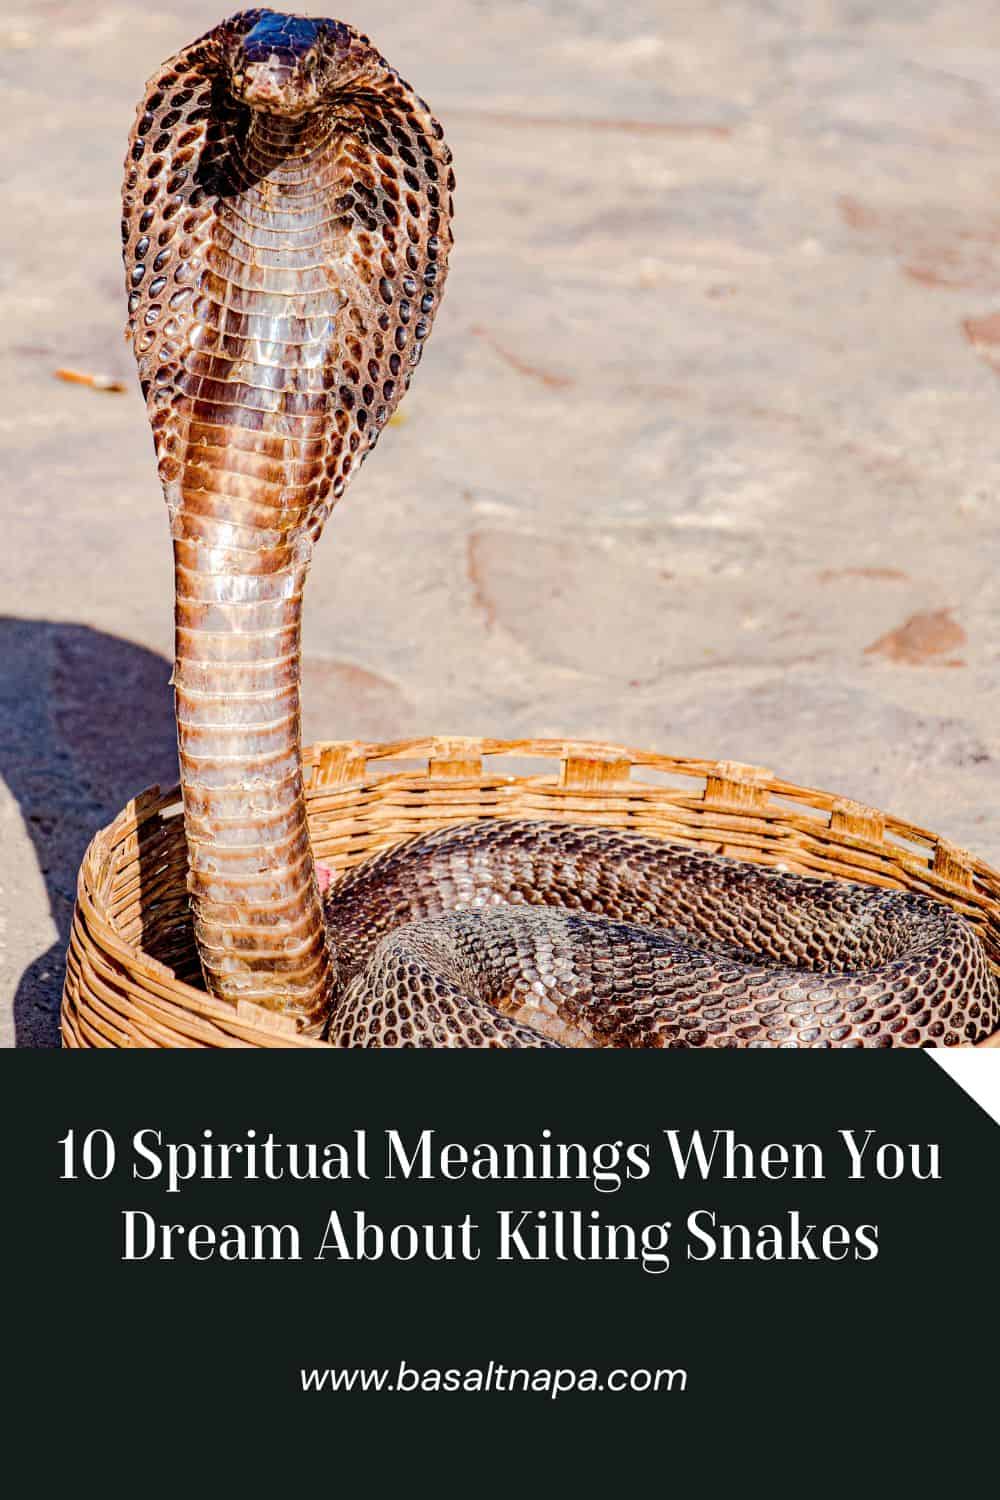 10 Spiritual Meanings When You Dream About Killing Snakes